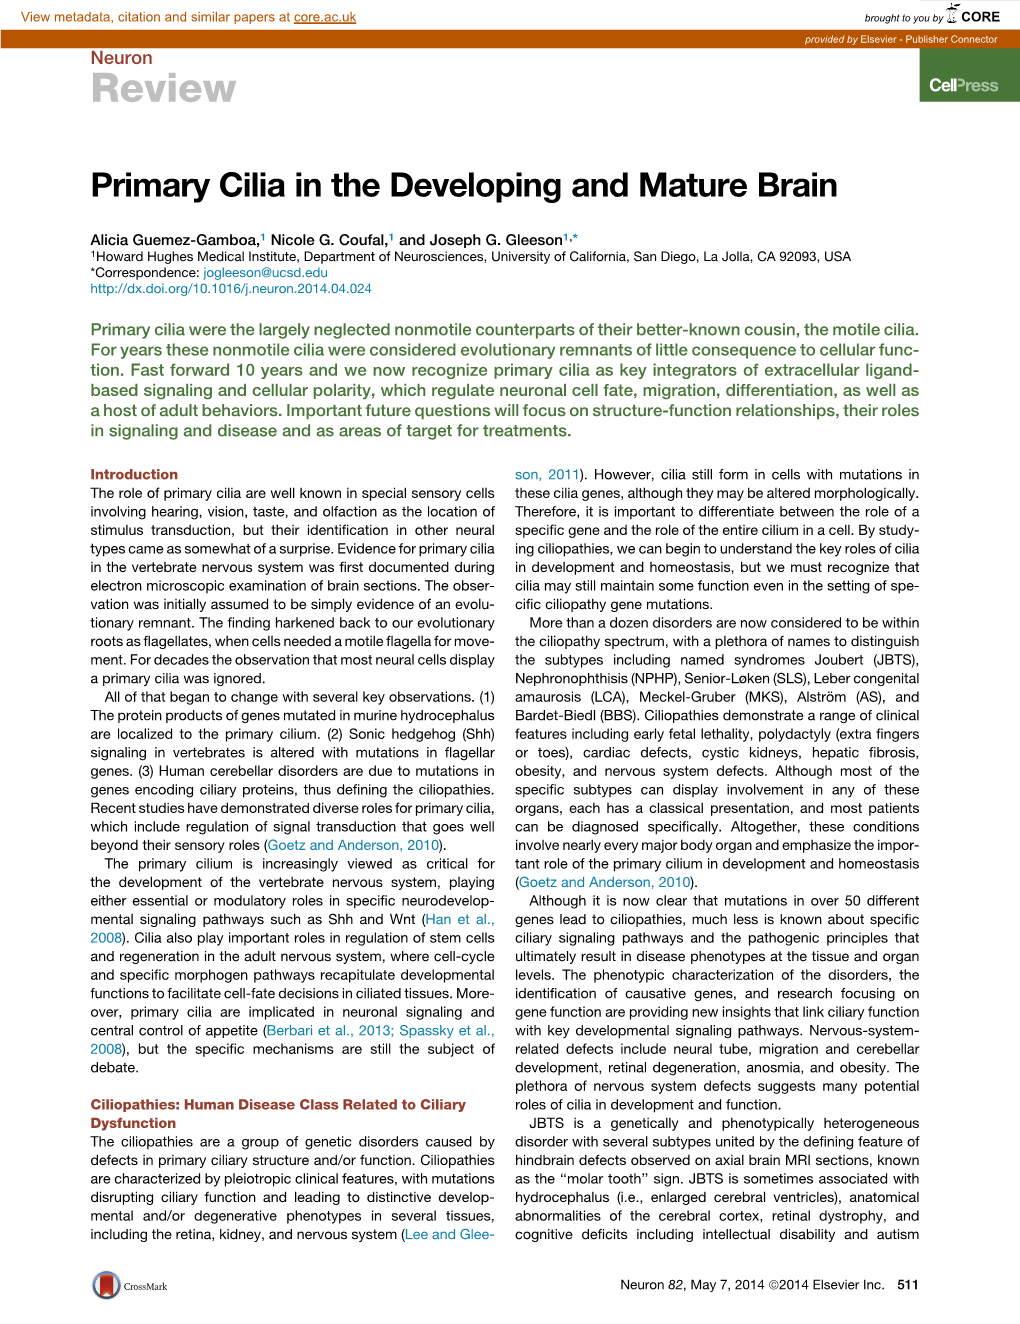 Primary Cilia in the Developing and Mature Brain